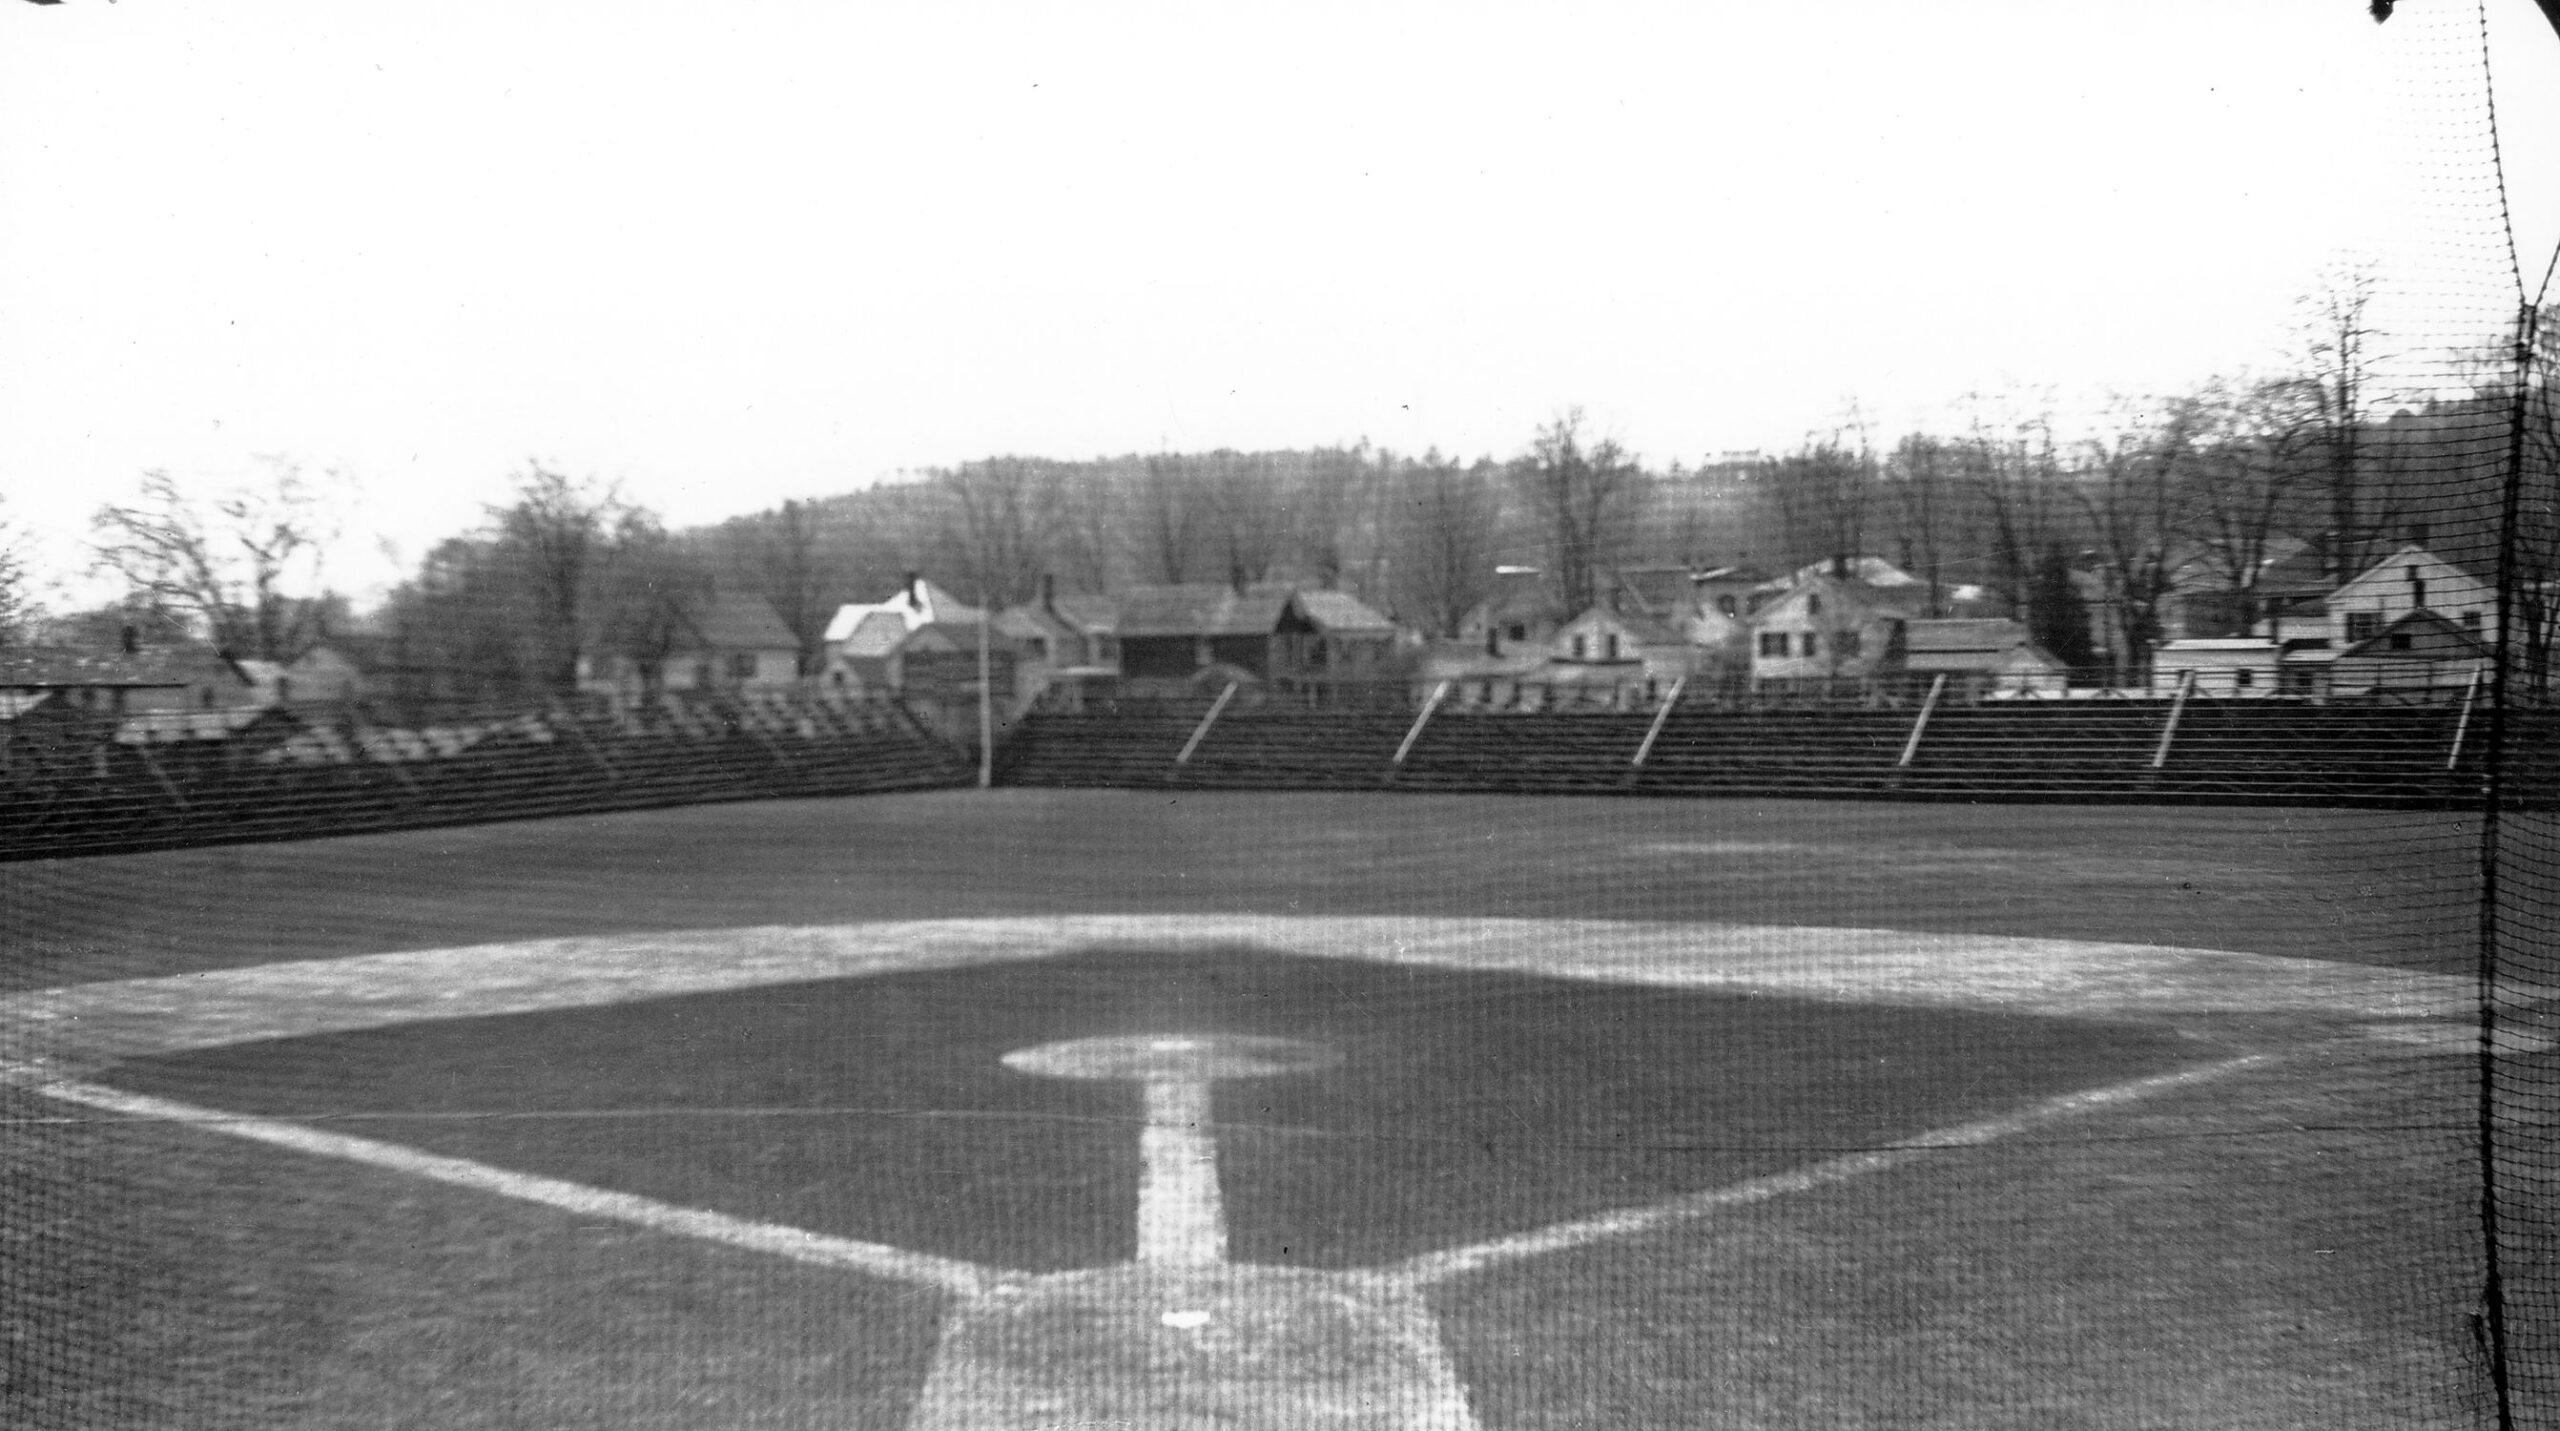 Doubleday Field during Induction.